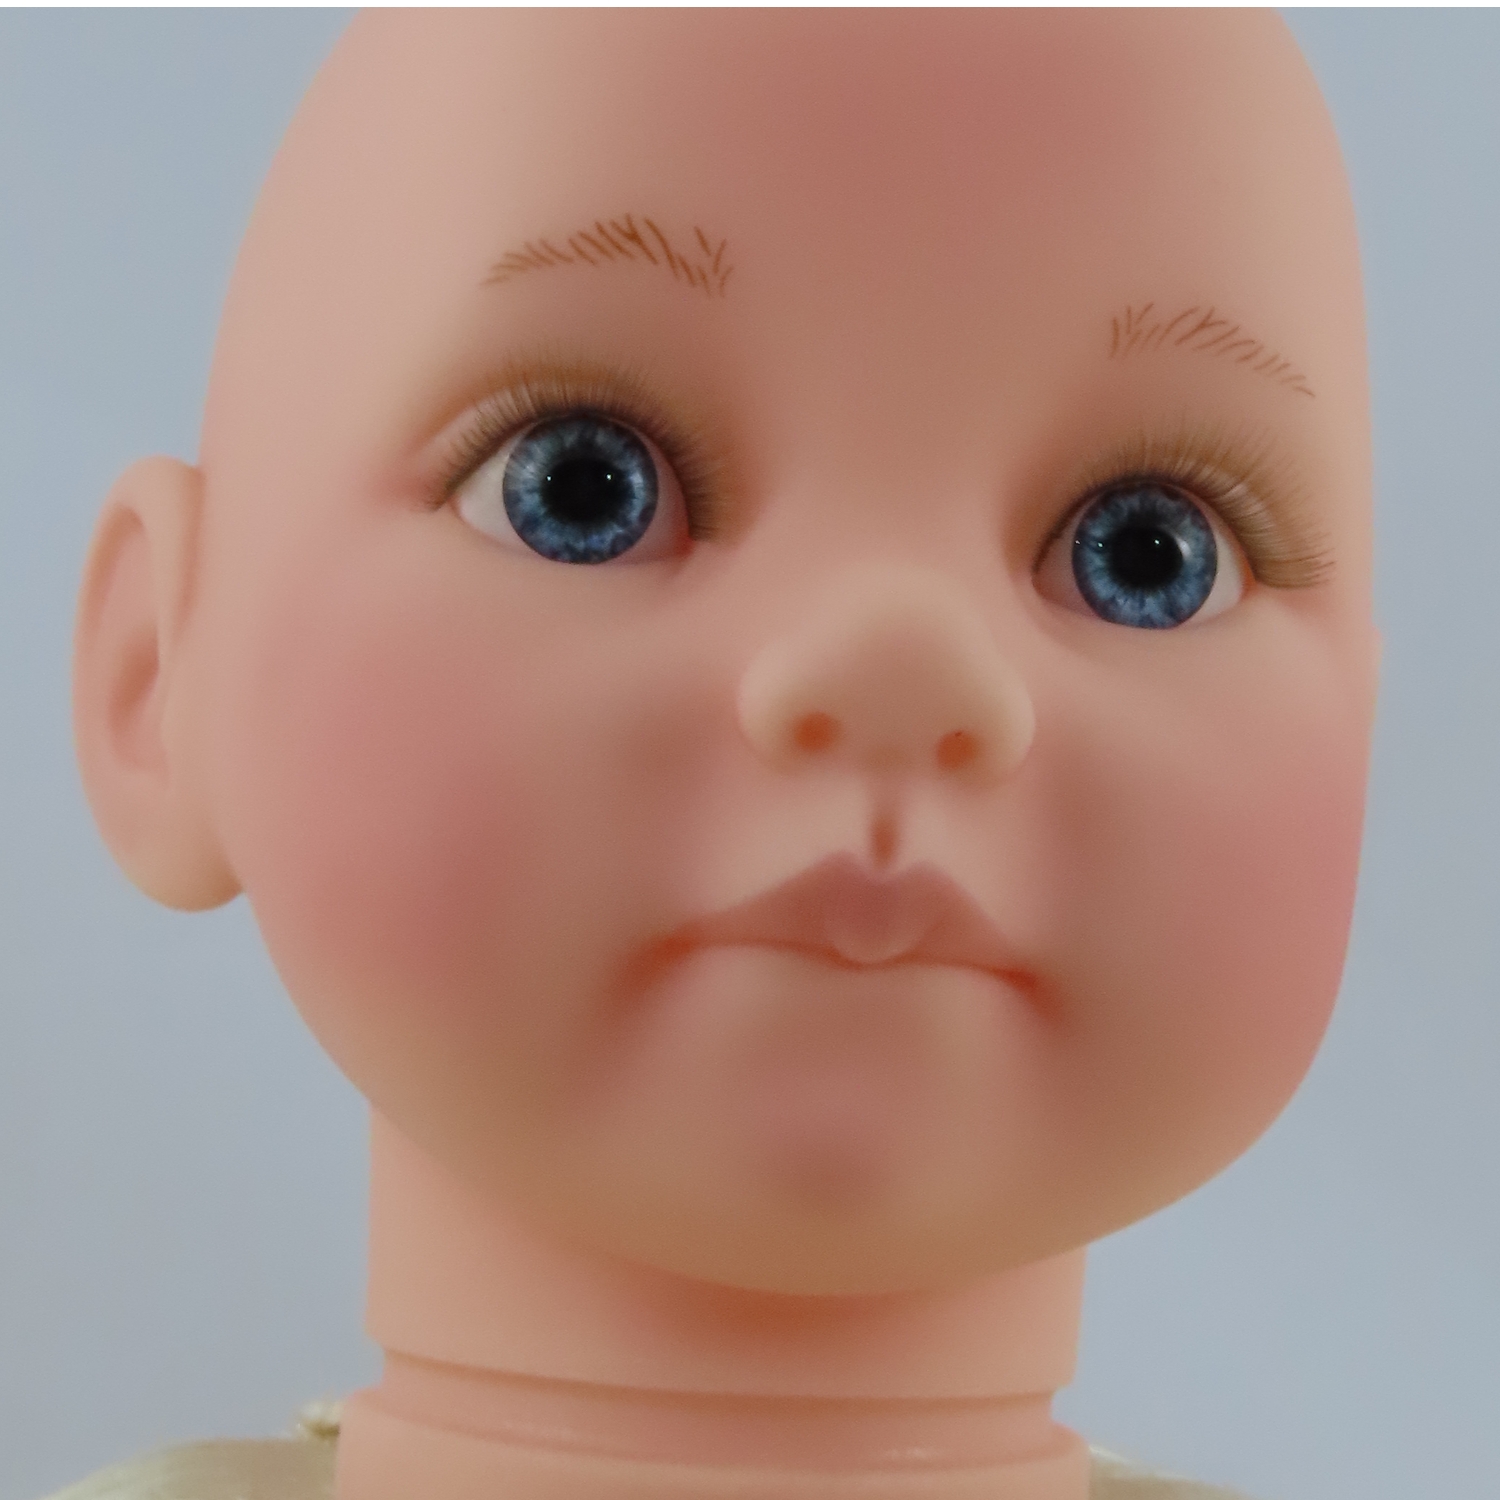 Bailey Doll Kit for Creating Toddler and Baby Dolls That Look Real